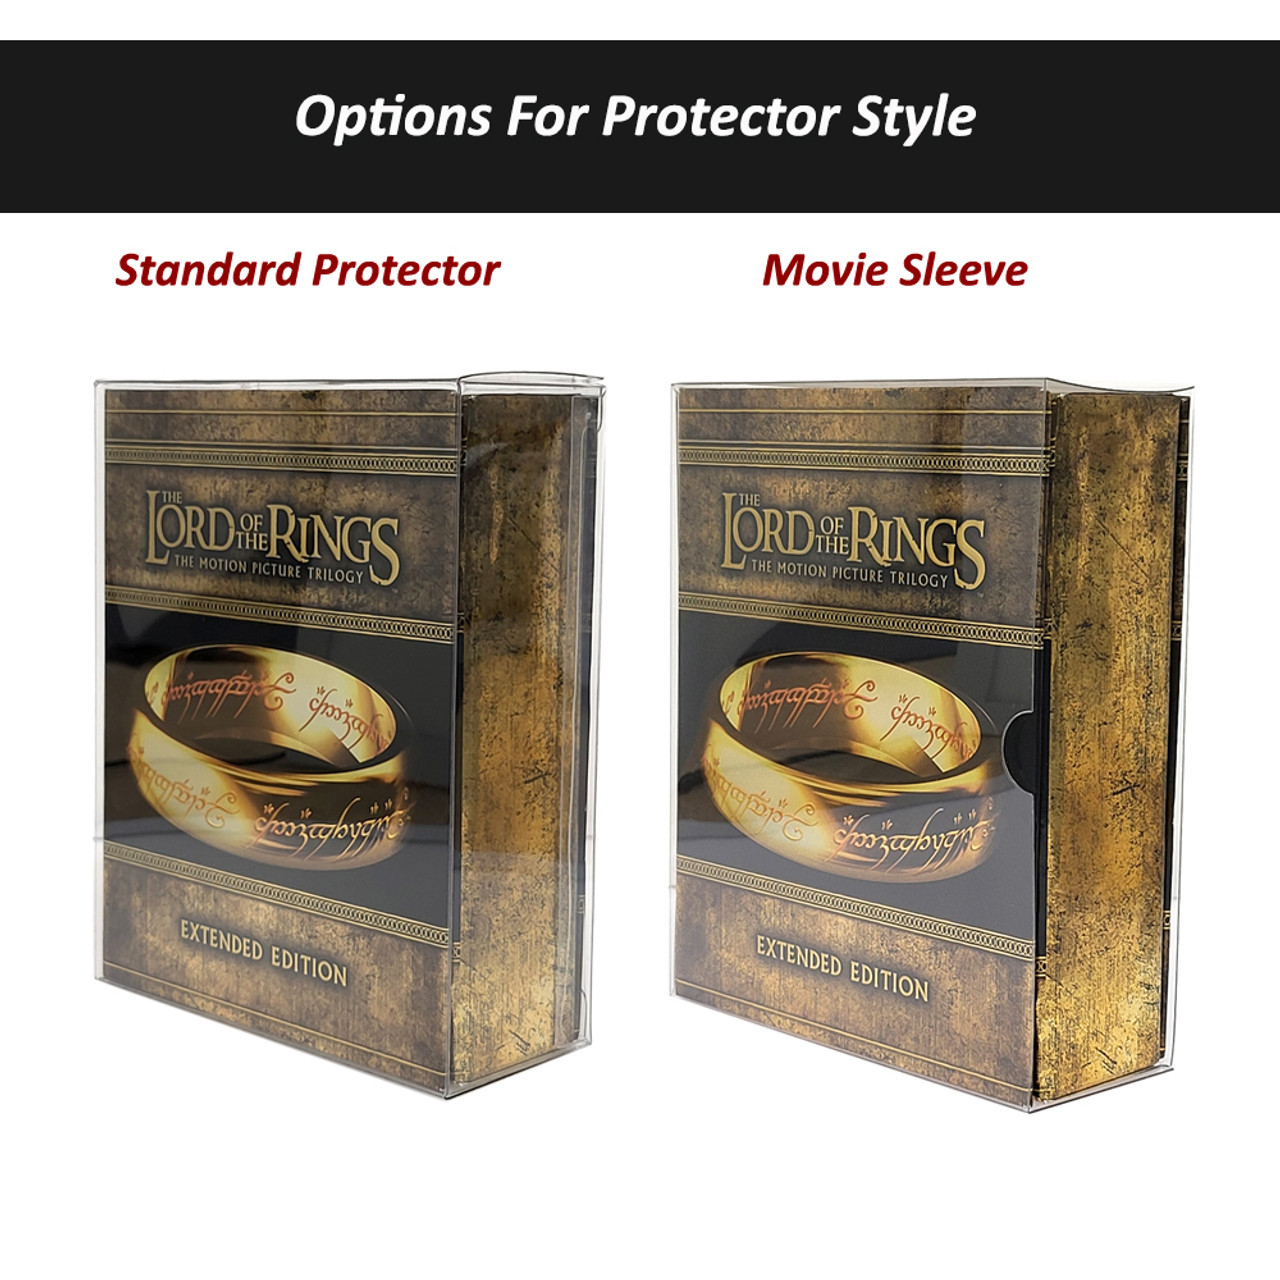 Protector For Black Christmas Collectors Edition Digibook Nameless Media